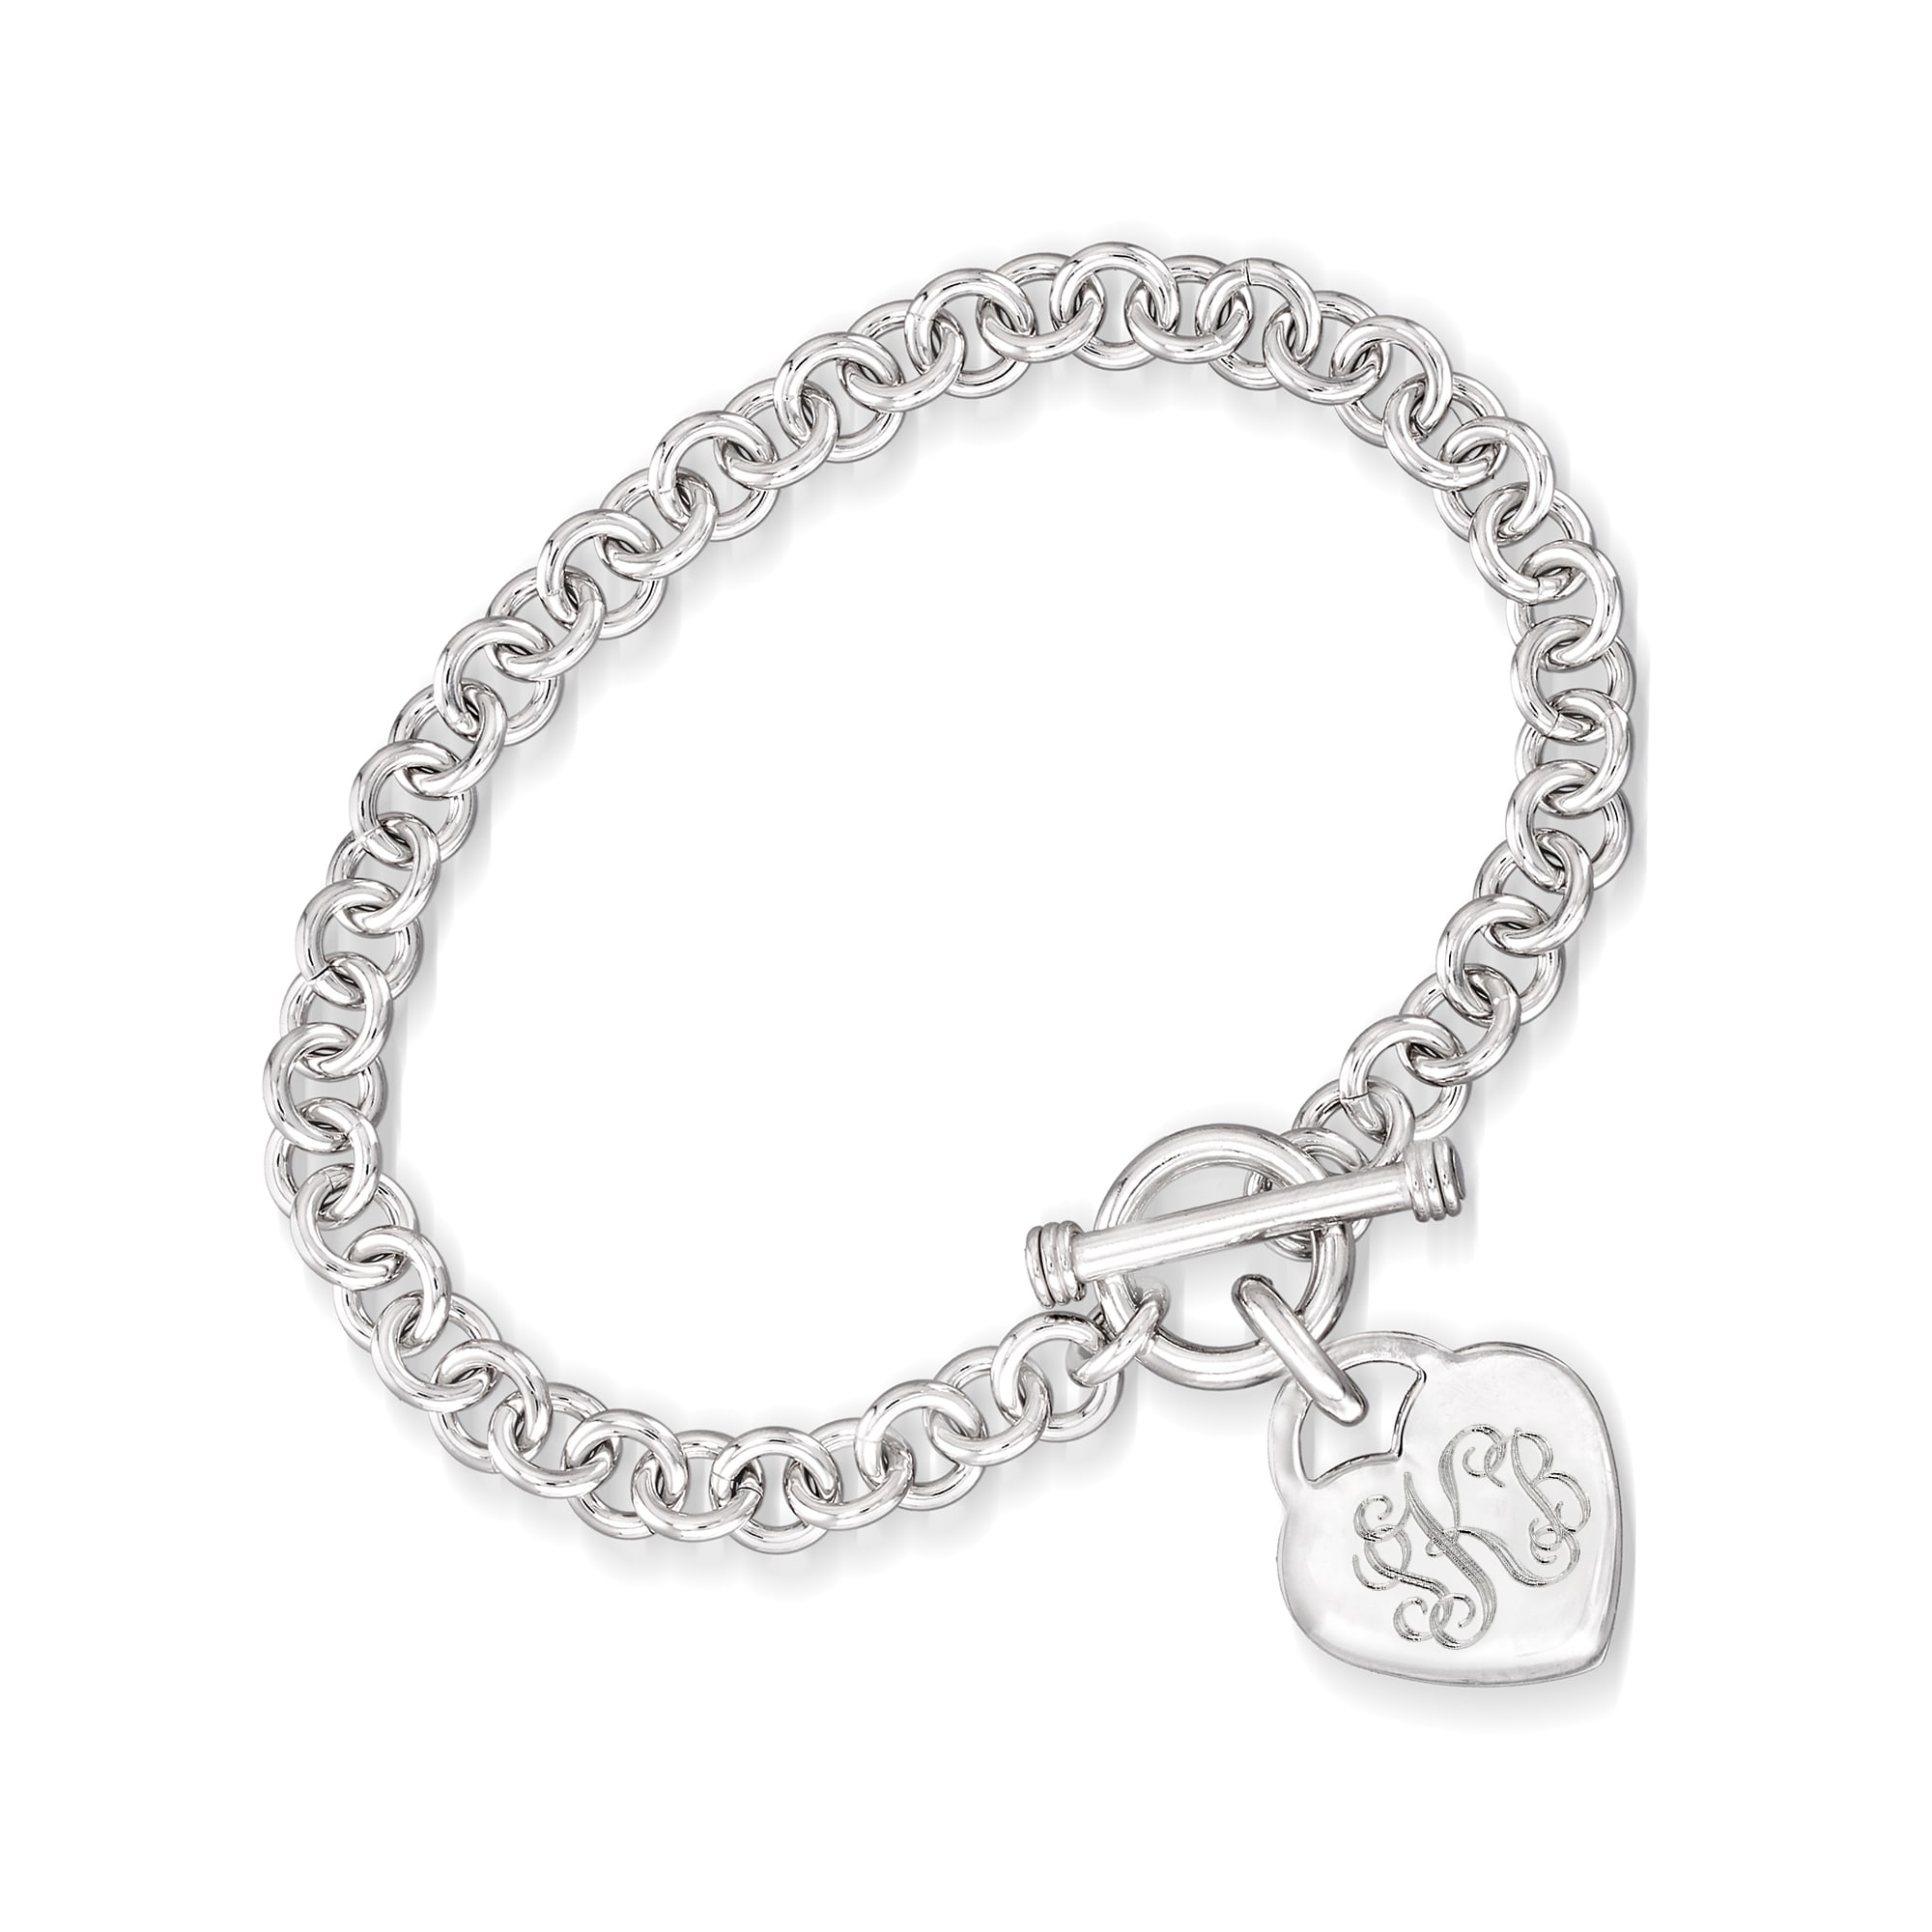 Peace, Love And Freedom Charm Bracelet - Silver, Charlotte's Web Jewelry